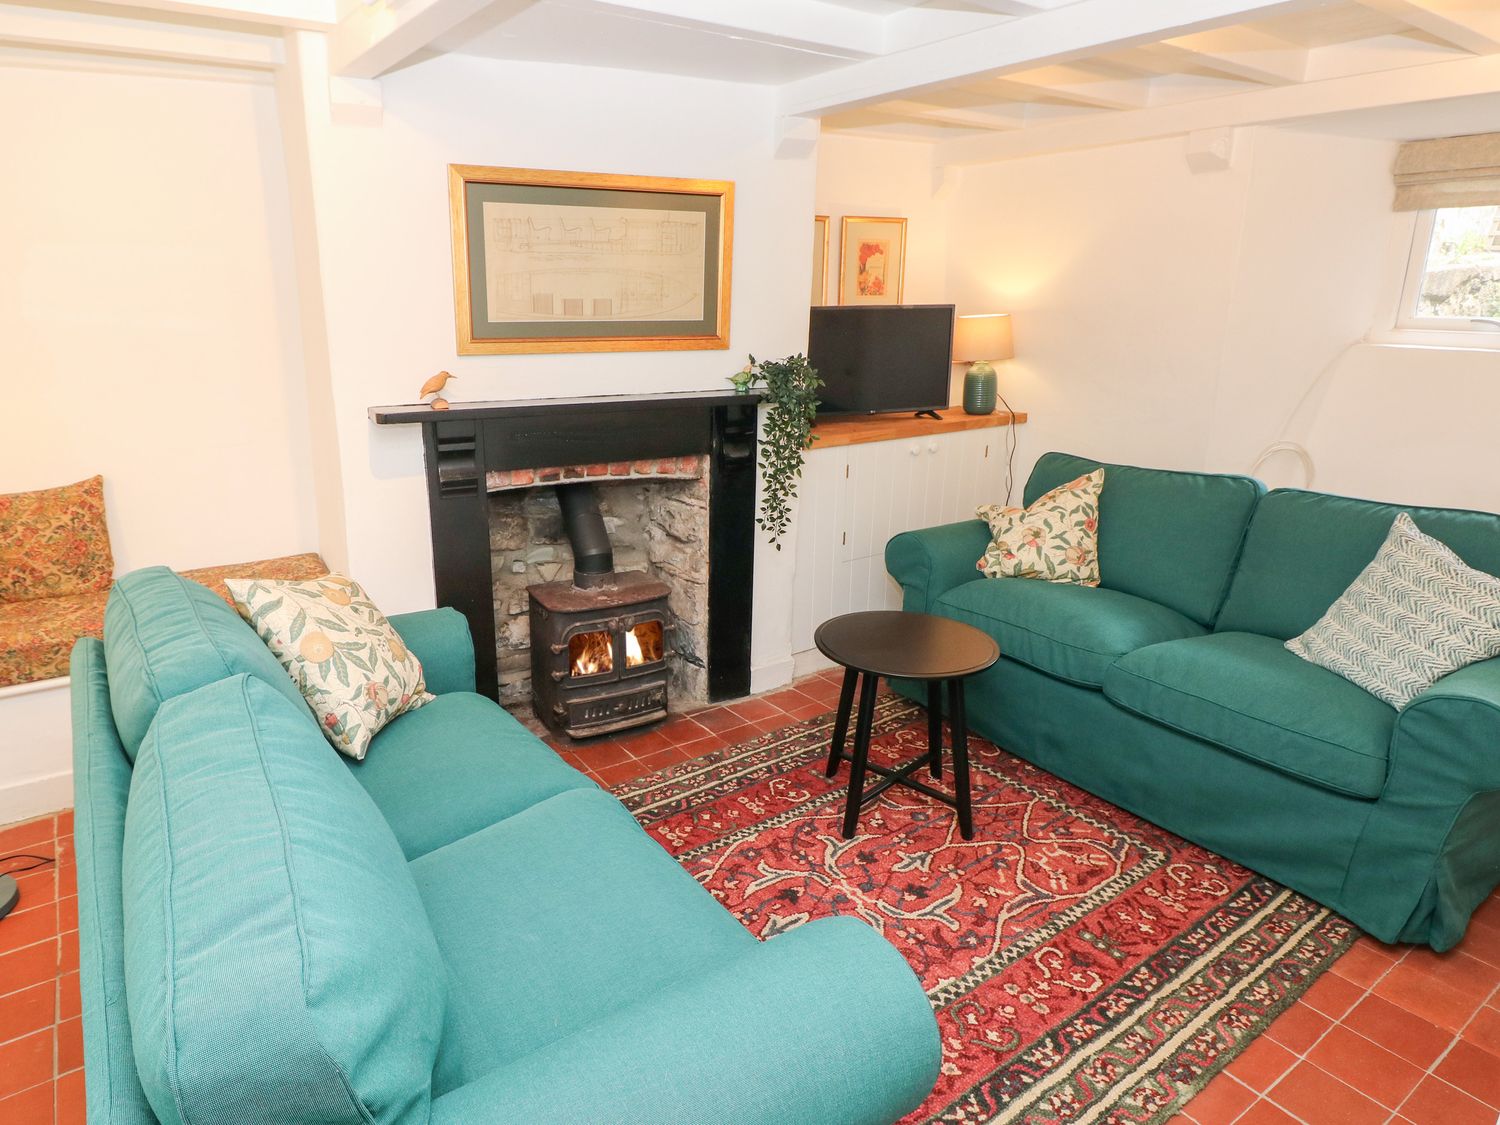 10 Westgate Hill - South Wales - 1128492 - photo 1